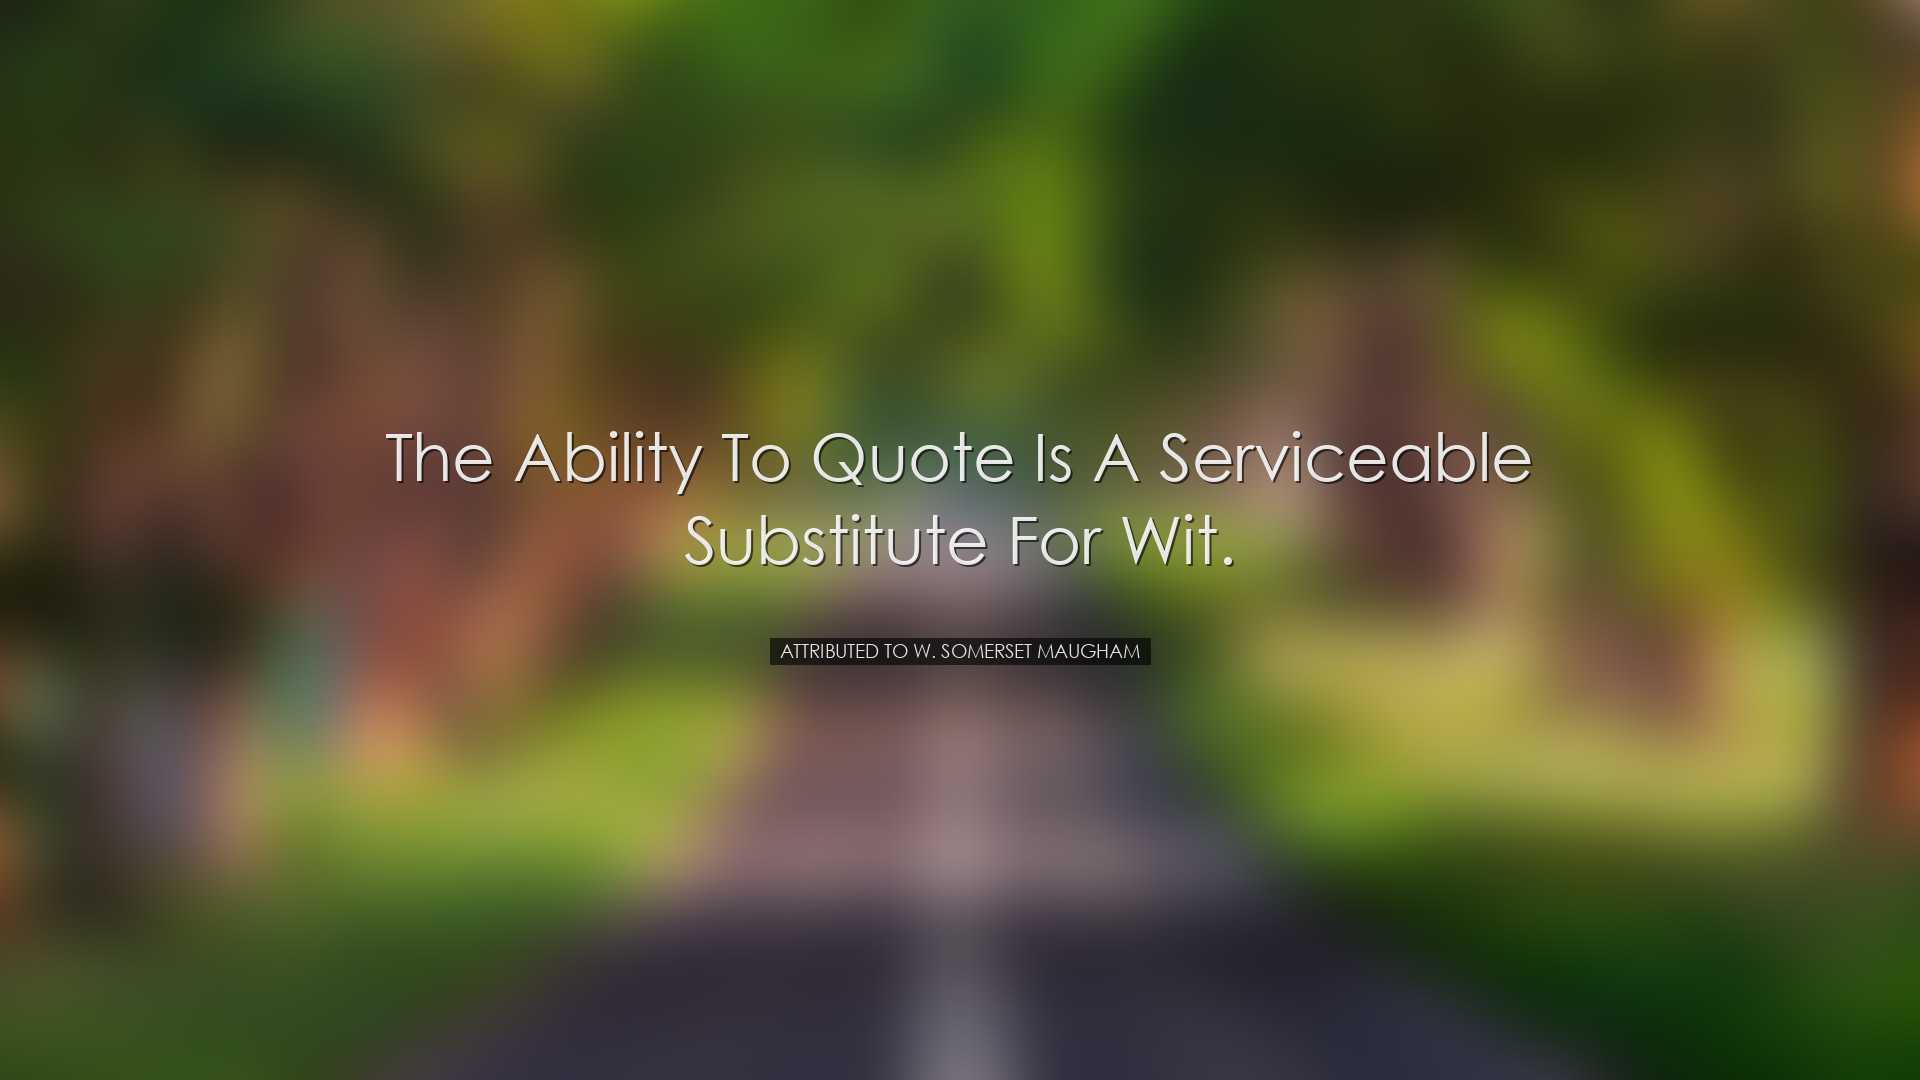 The ability to quote is a serviceable substitute for wit. - Attrib